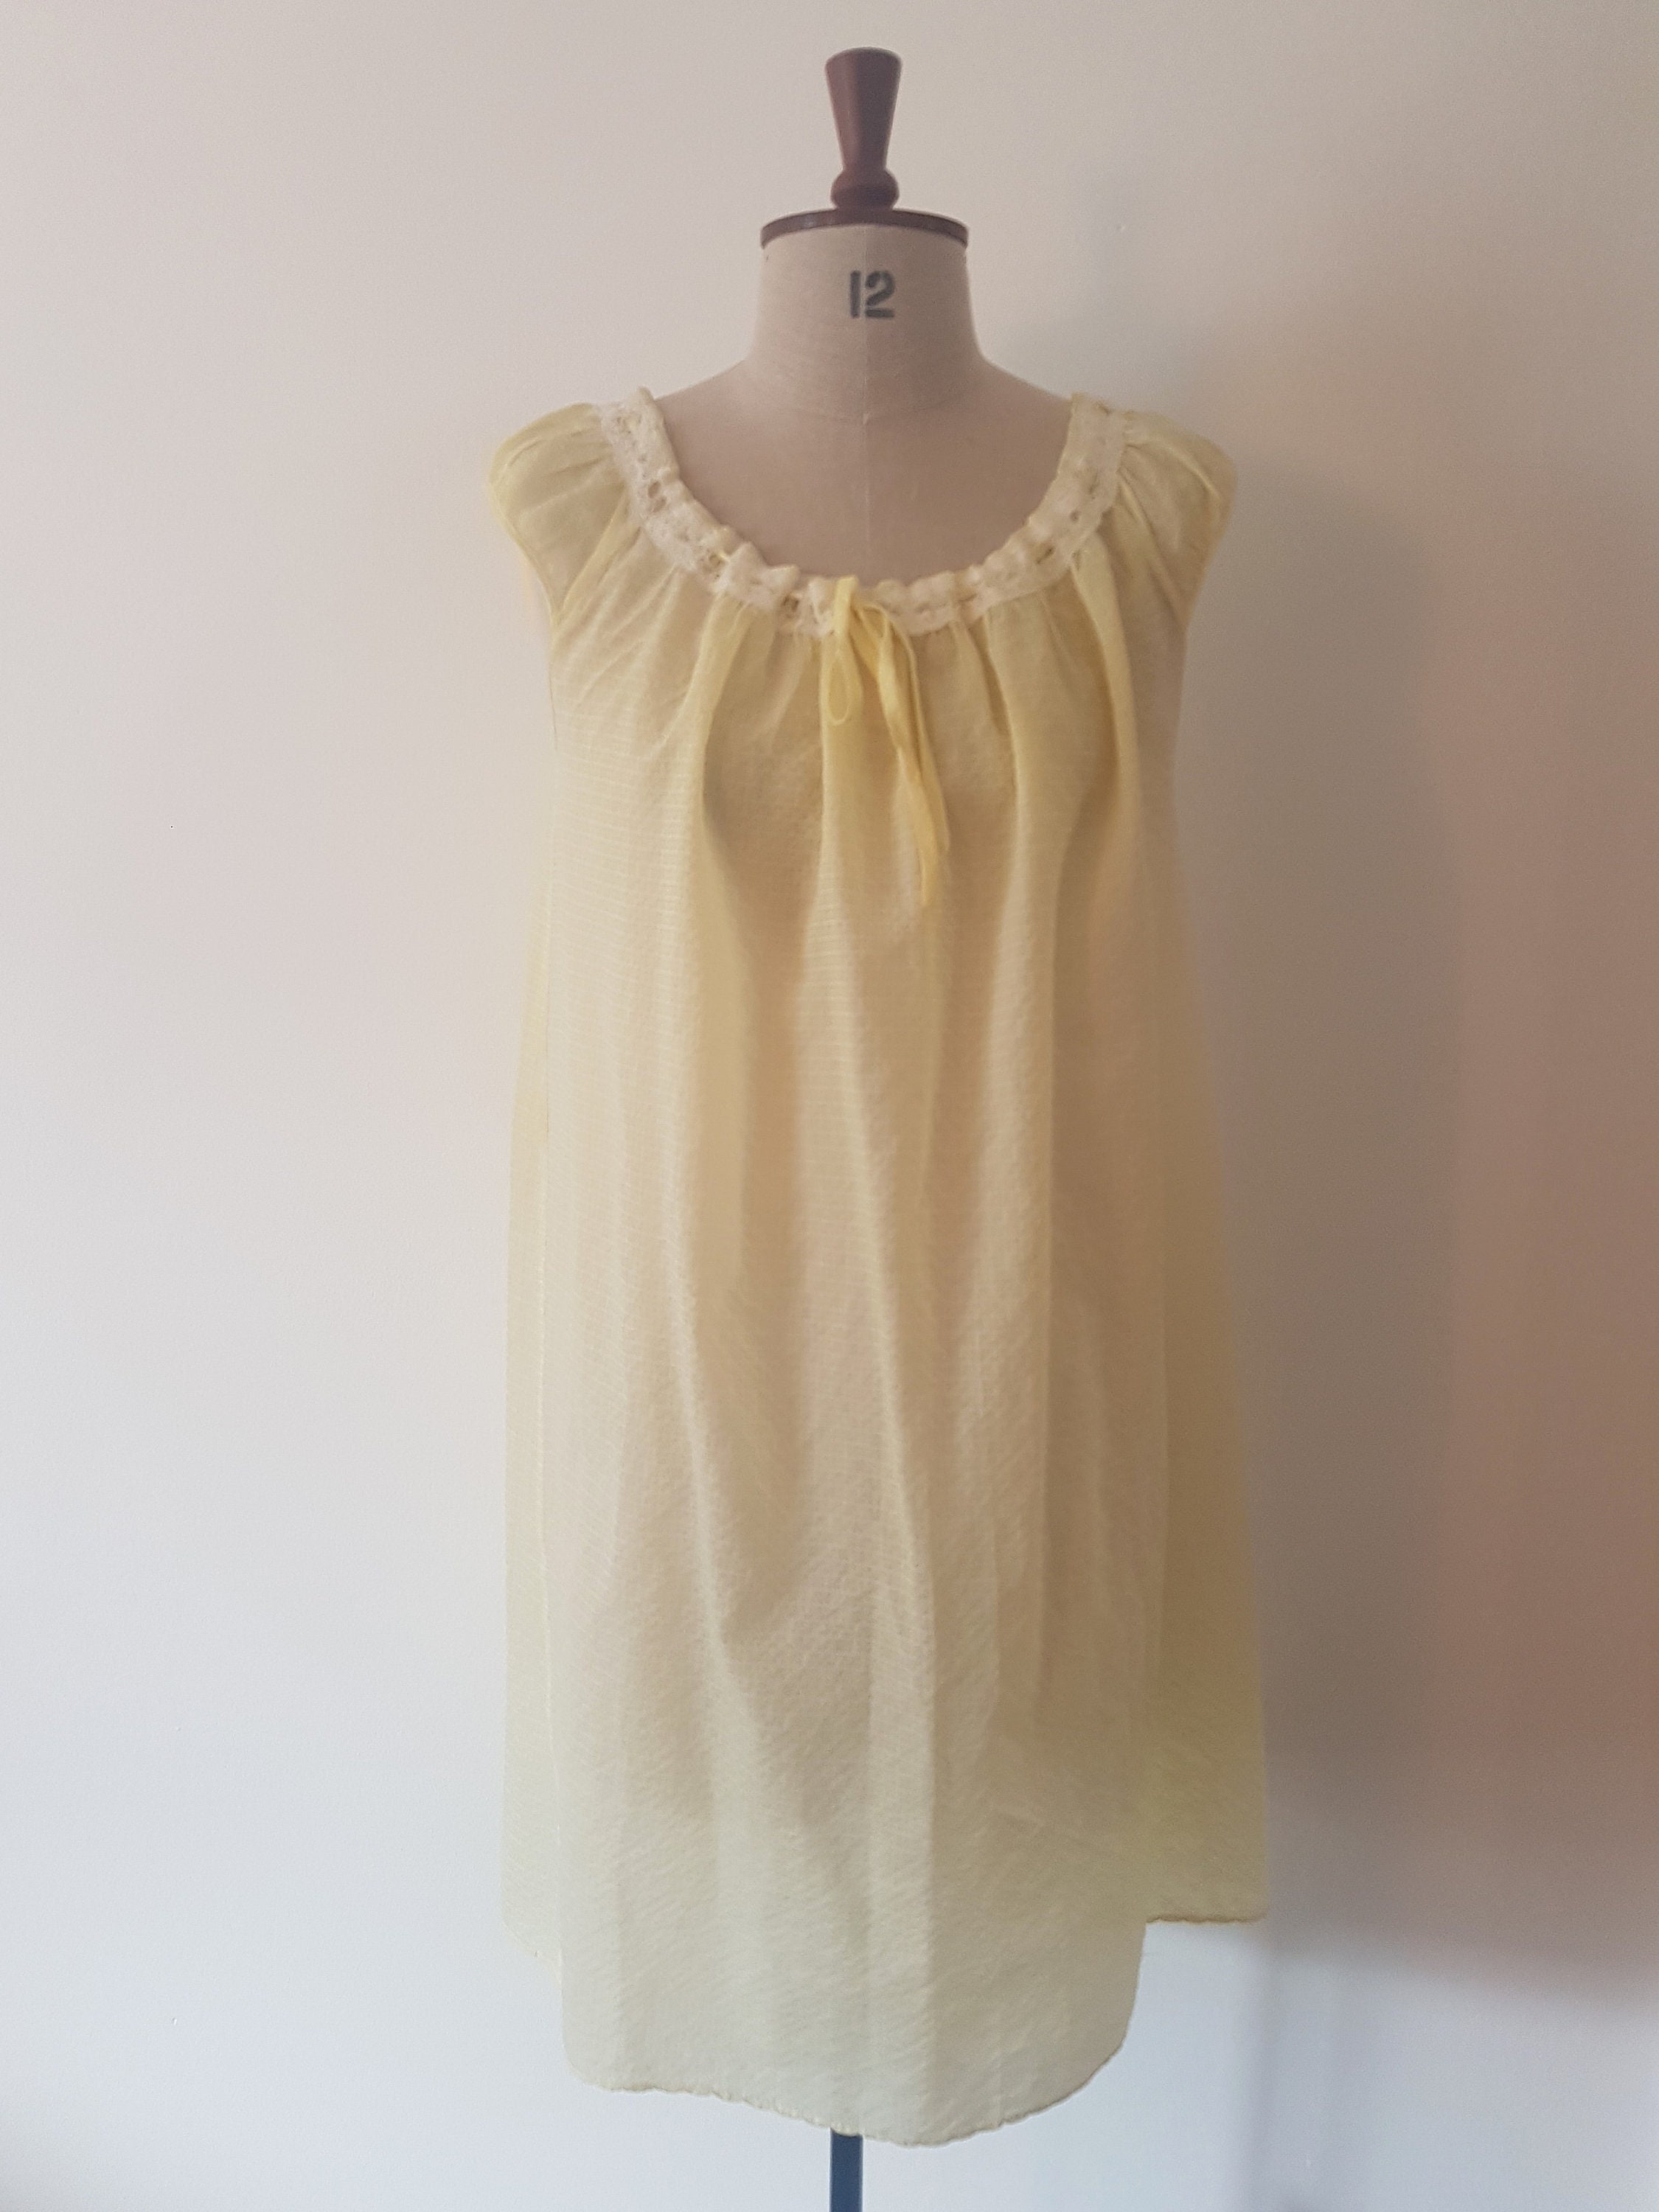 1960's yellow and white babydoll nightie | Etsy